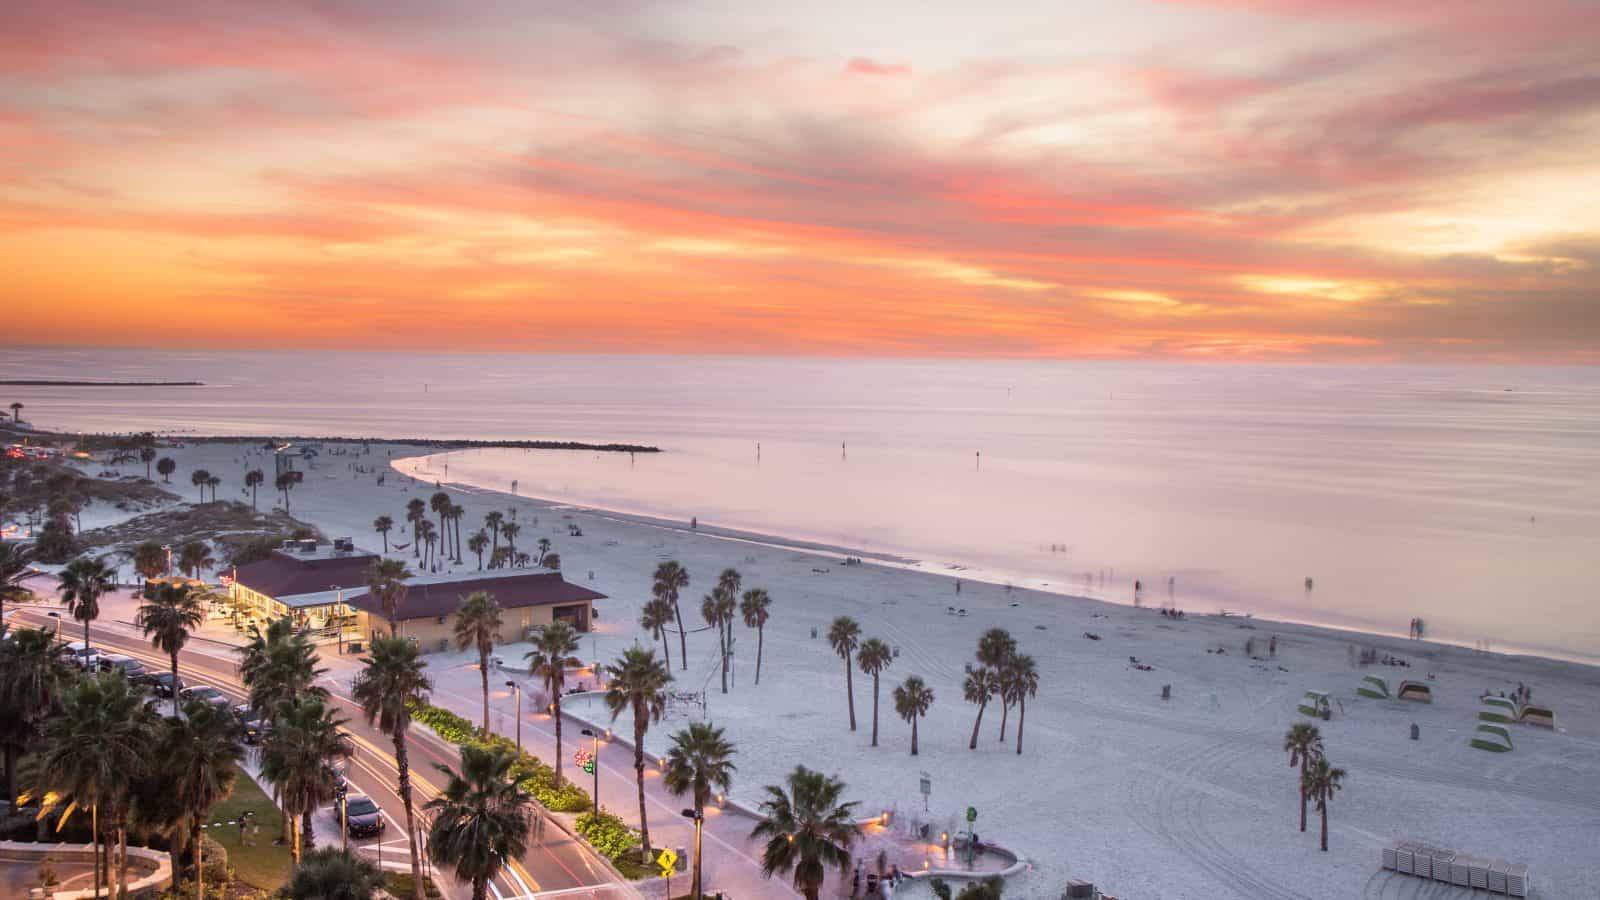 A scenic beach at sunset with a colorful sky displaying shades of orange, pink, and yellow. The sandy shoreline is dotted with palm trees and small shelters perfect for campers. A road runs parallel to the beach, bordered by more palm trees and lighted buildings. The calm ocean reflects the sunset.